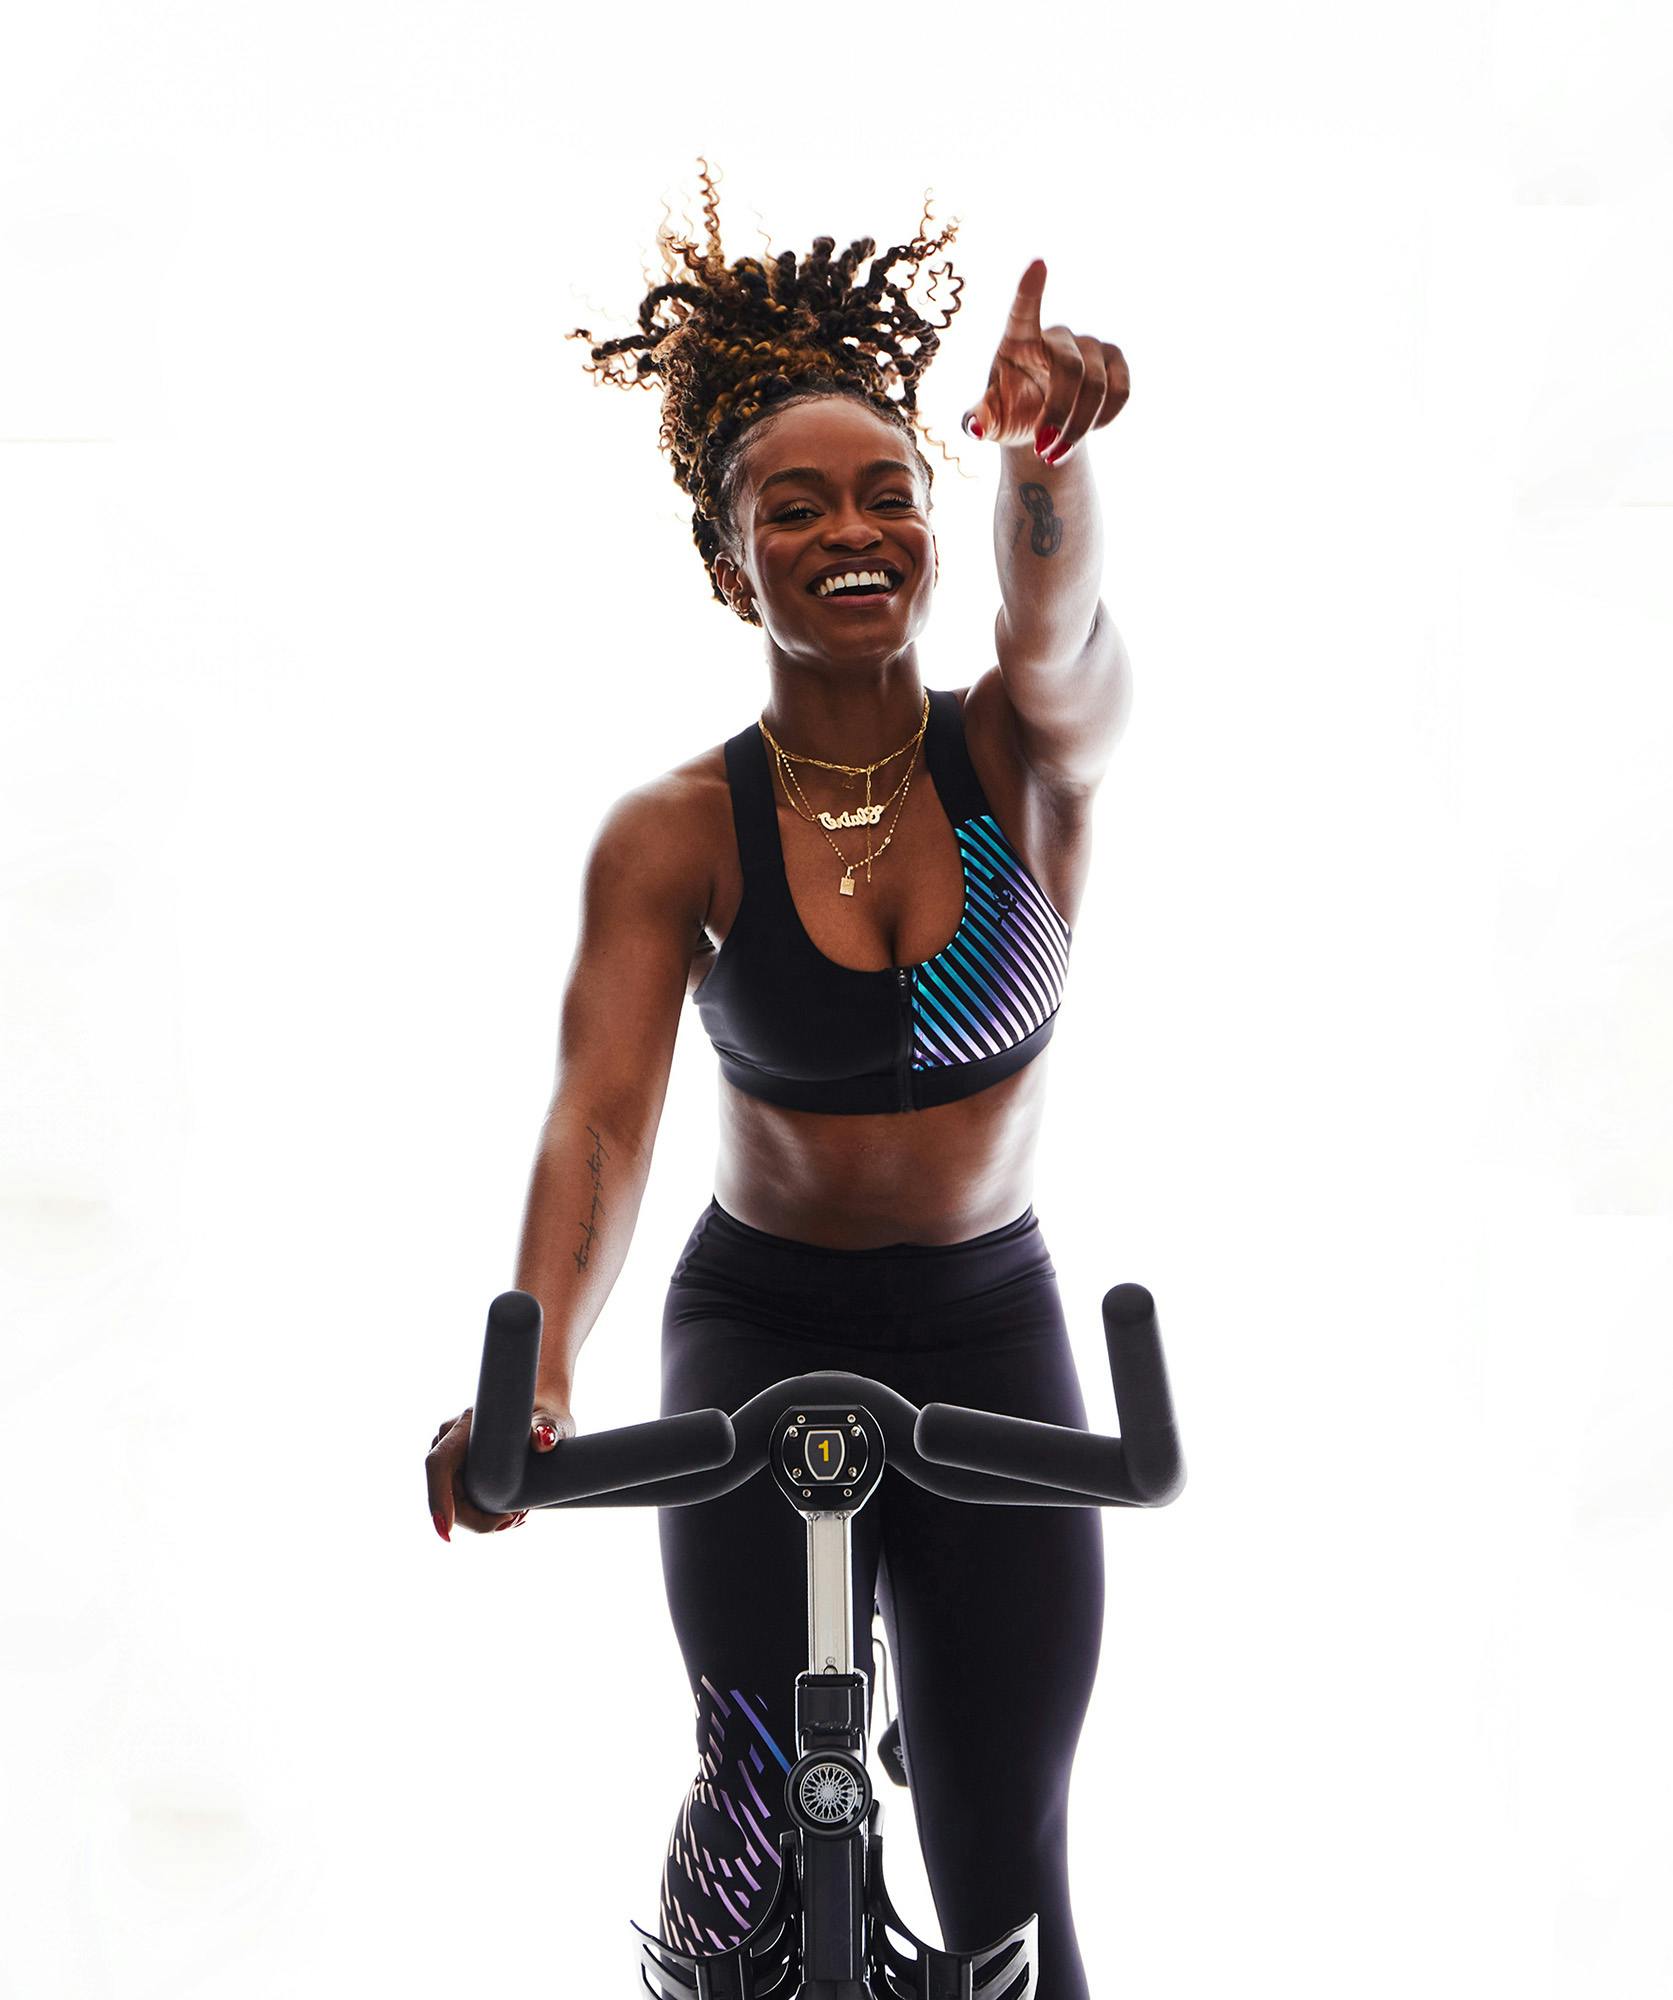 A woman in workout clothes riding a SoulCycle bike